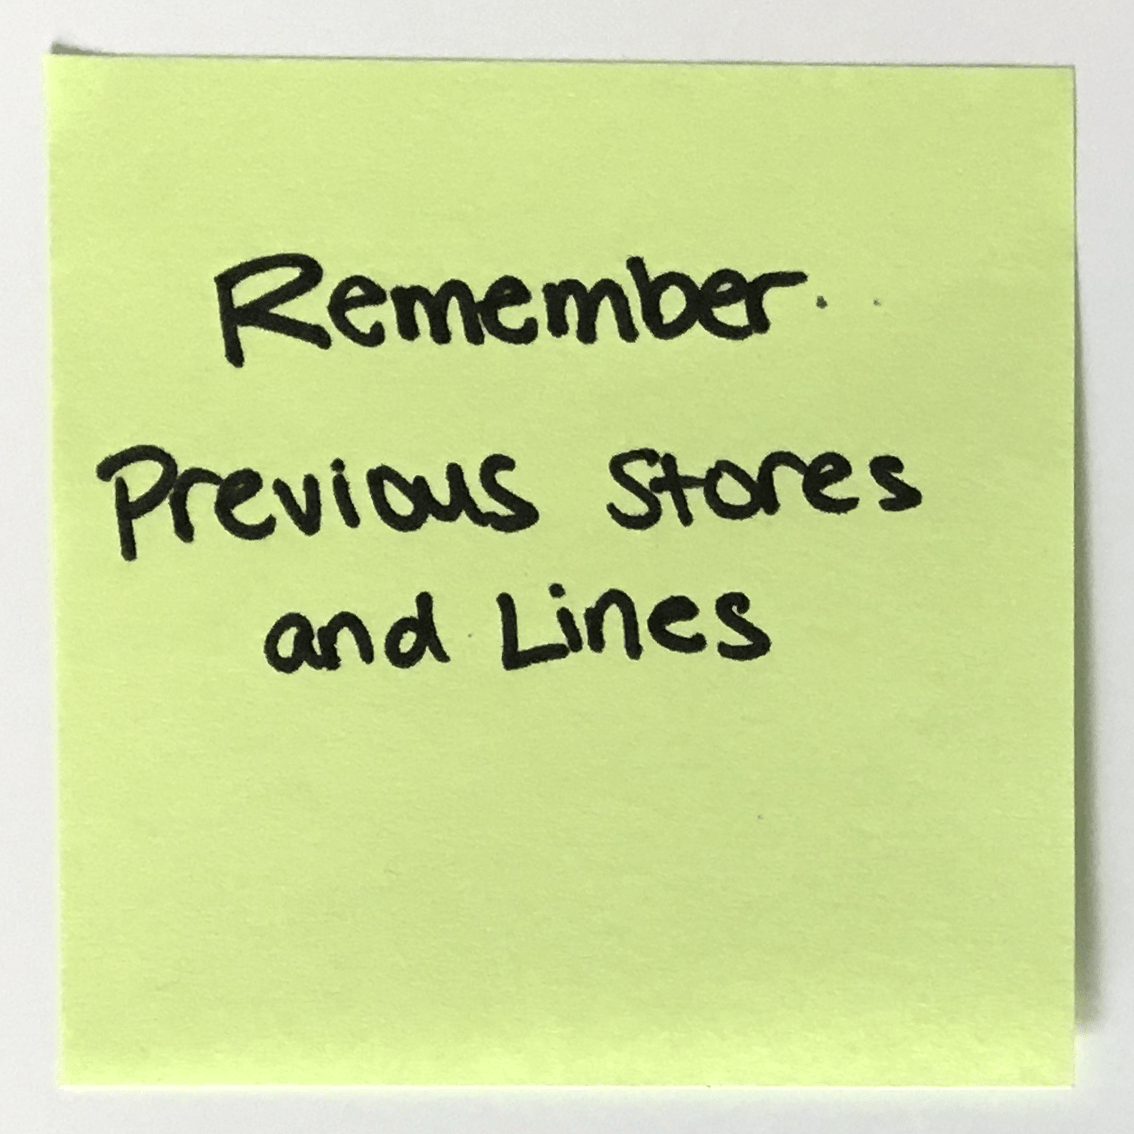 Post It with writing: 'Remember Previous Stores and Lines'